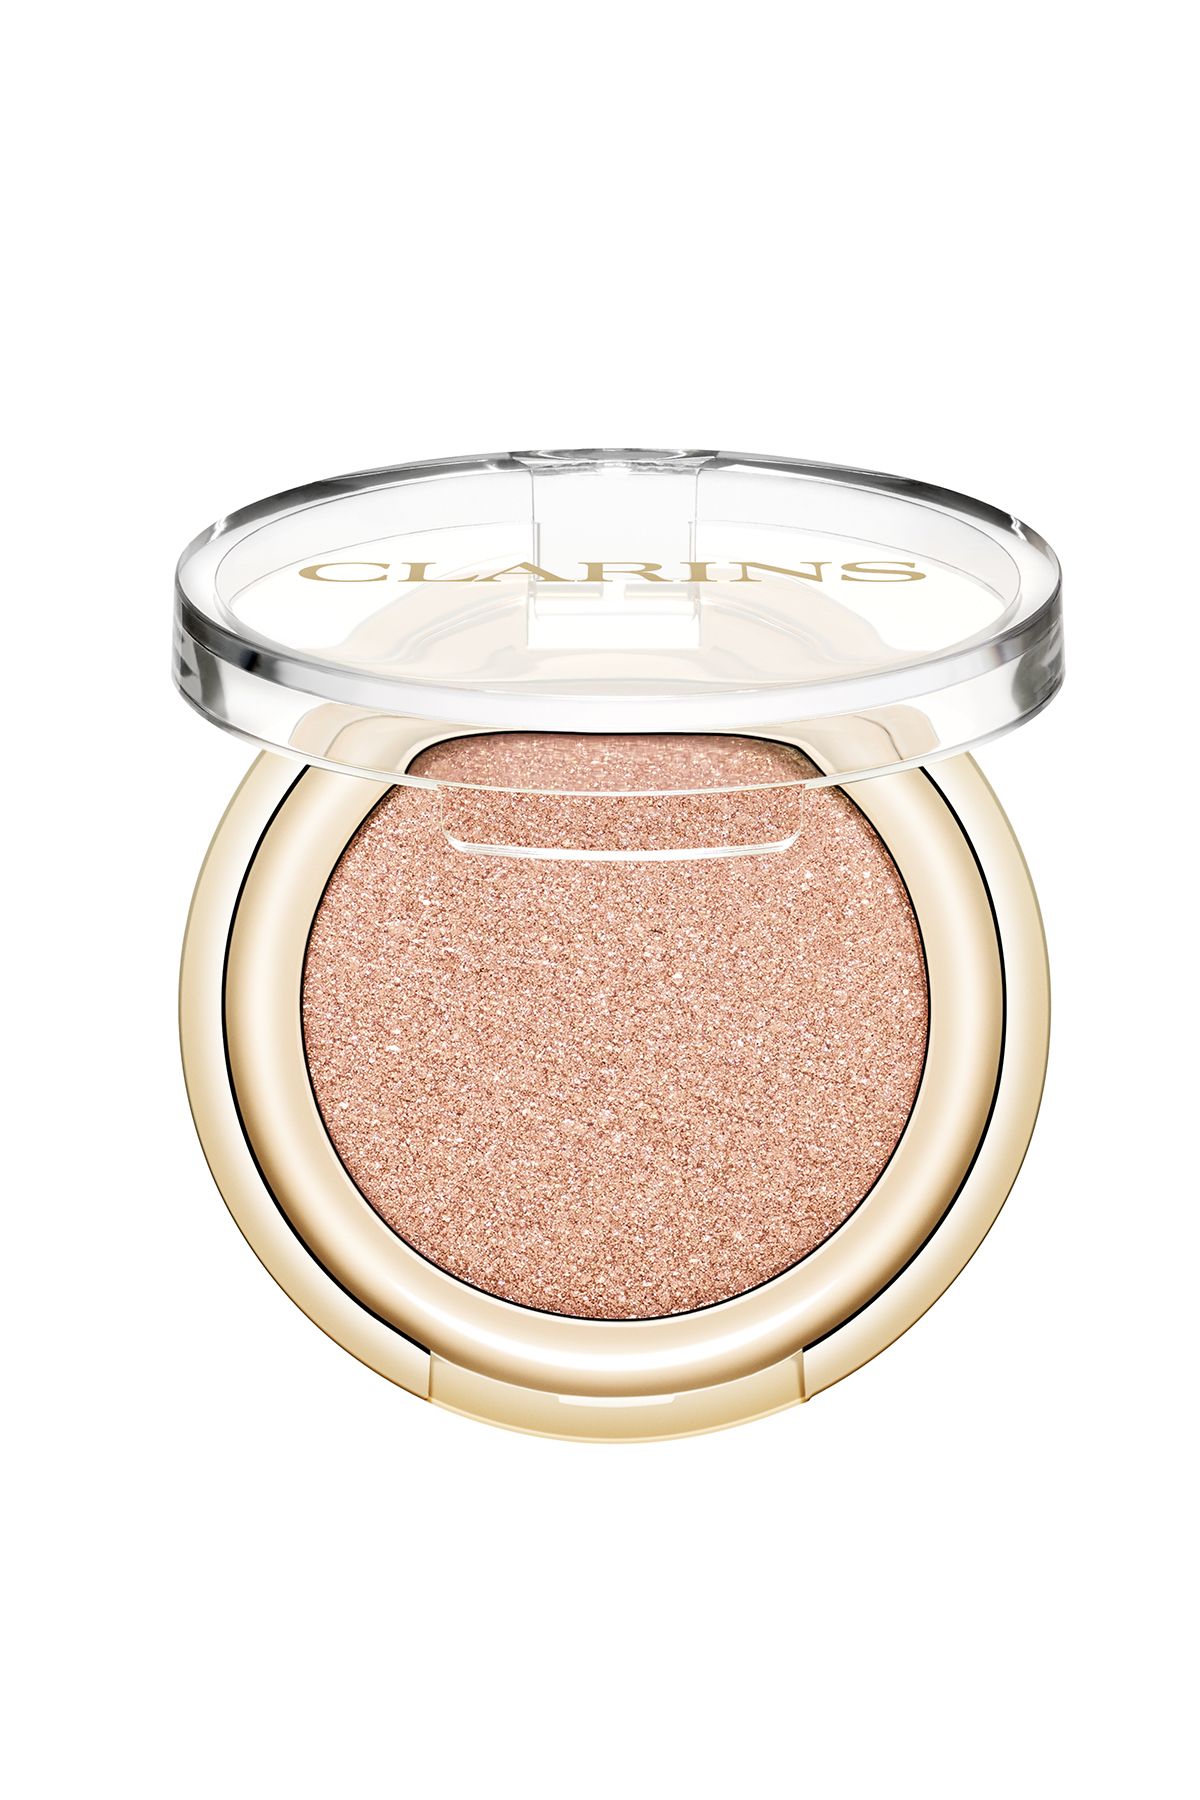 Clarins OMBRE SKIN 02 23